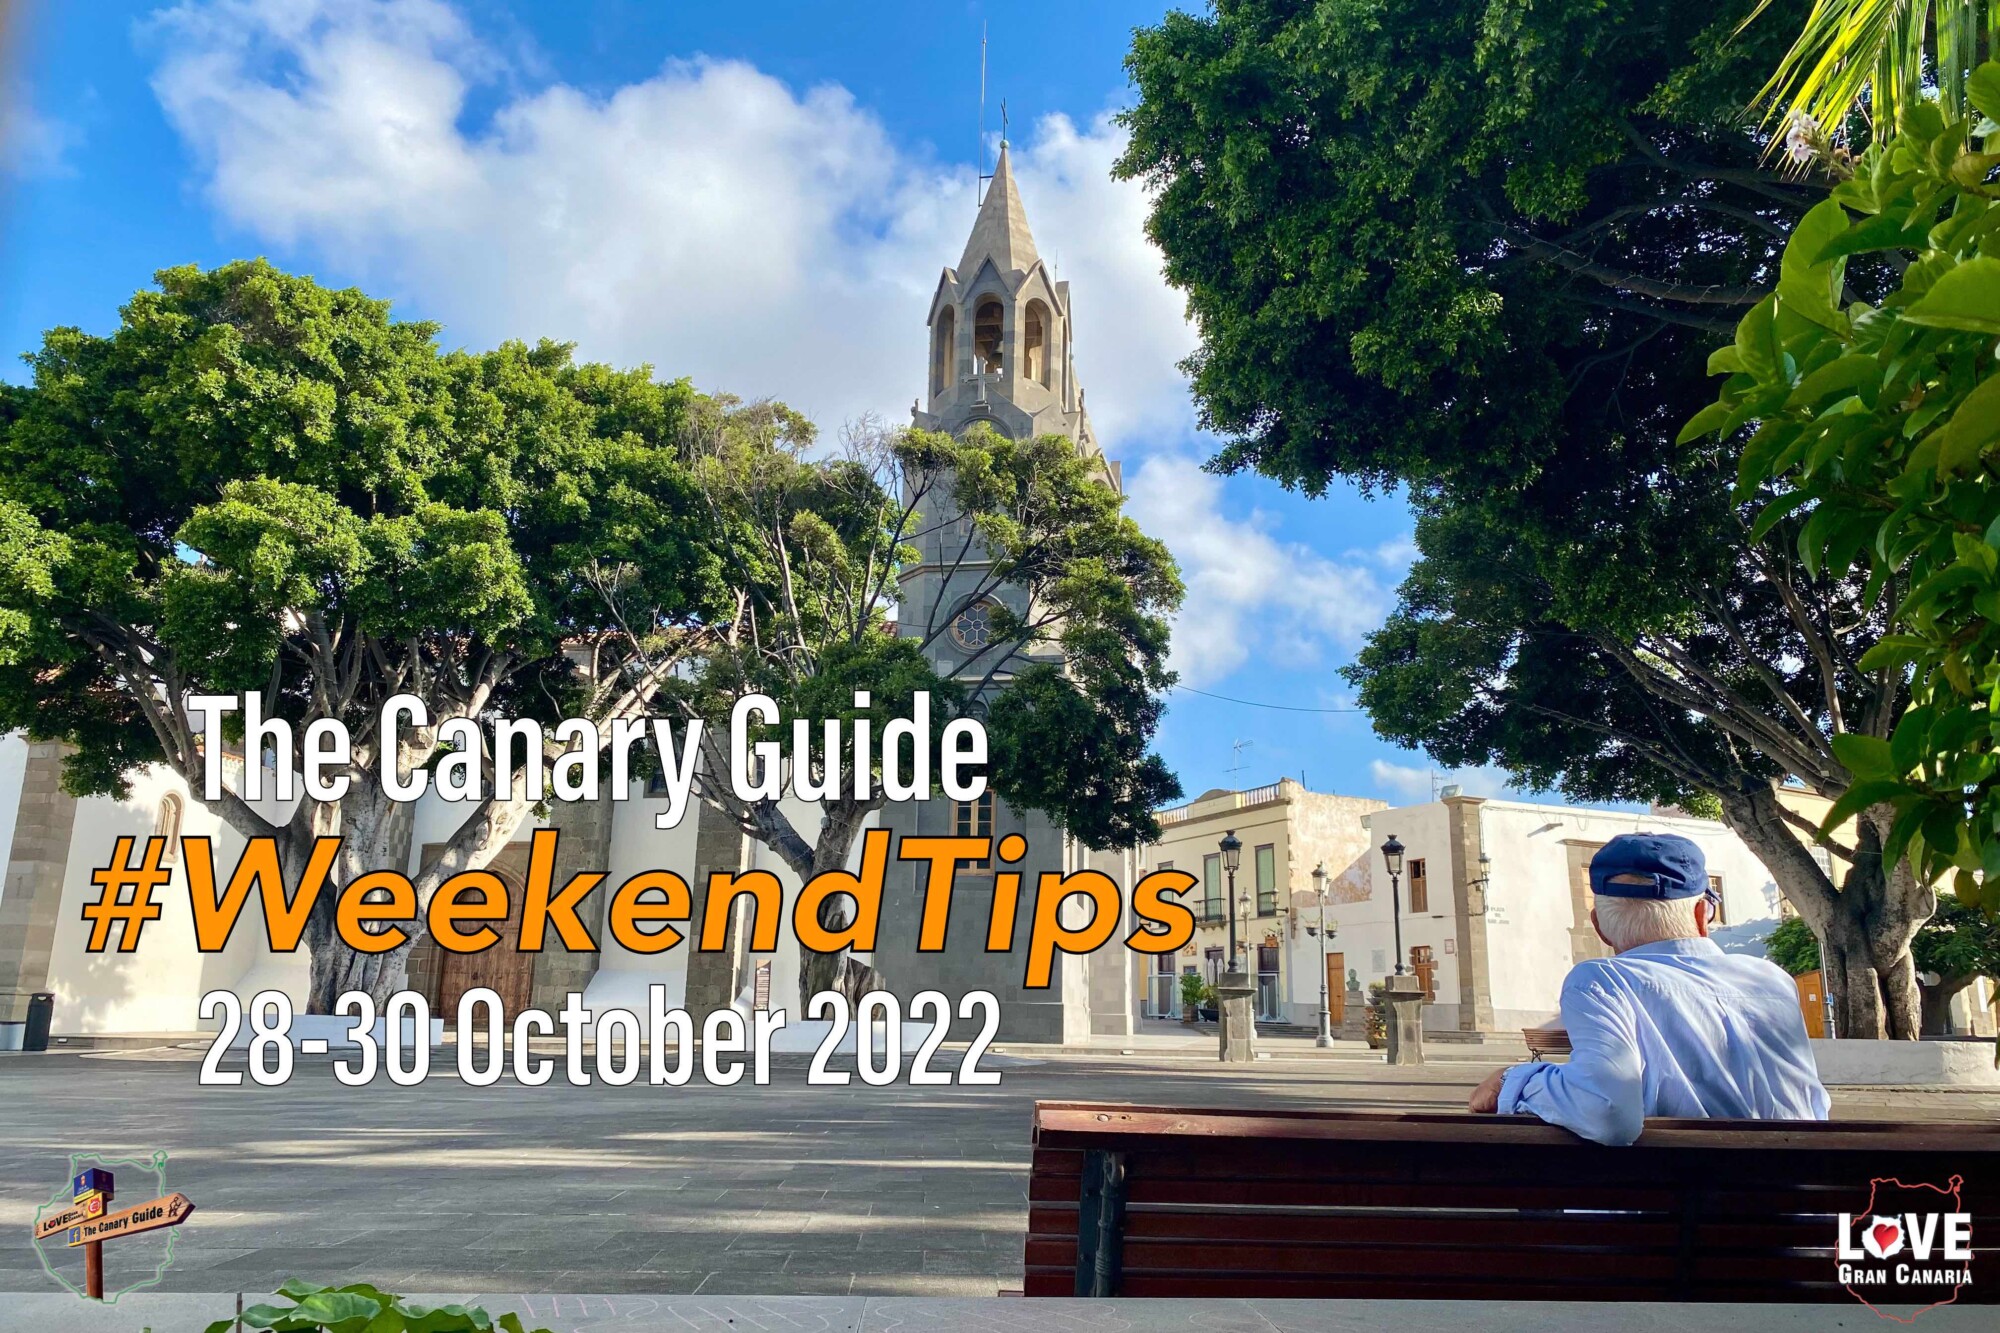 The Canary Guide #Weekend Tips 28-30 October 2022